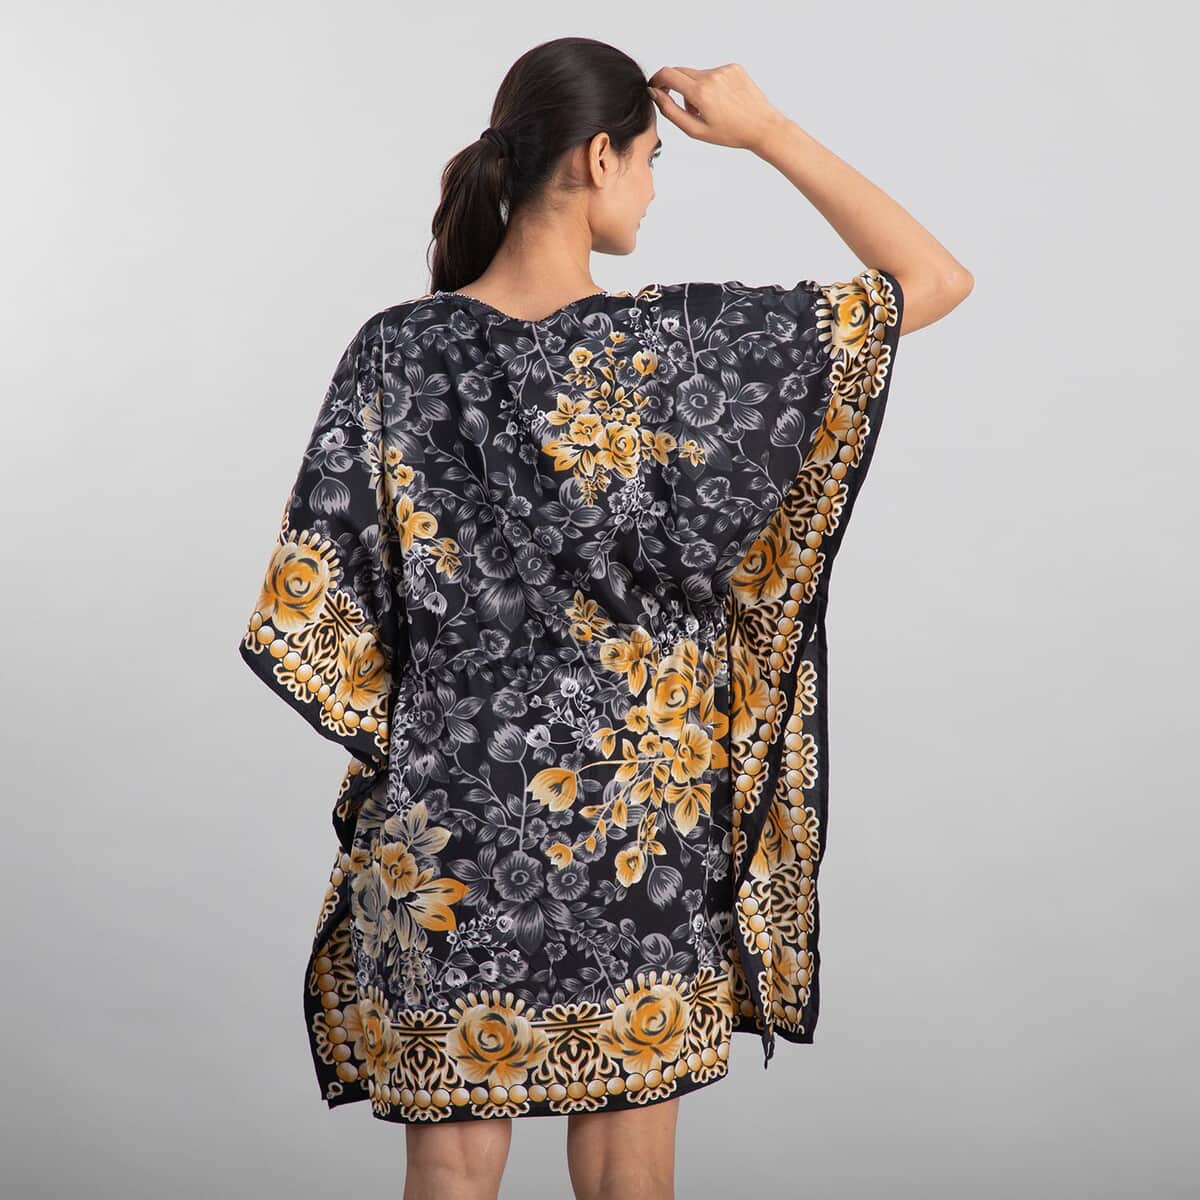 TAMSY Gray Floral Print 100% Polyester V-neck Kaftan with Pockets - One Size Fits Most (36"x41") image number 1